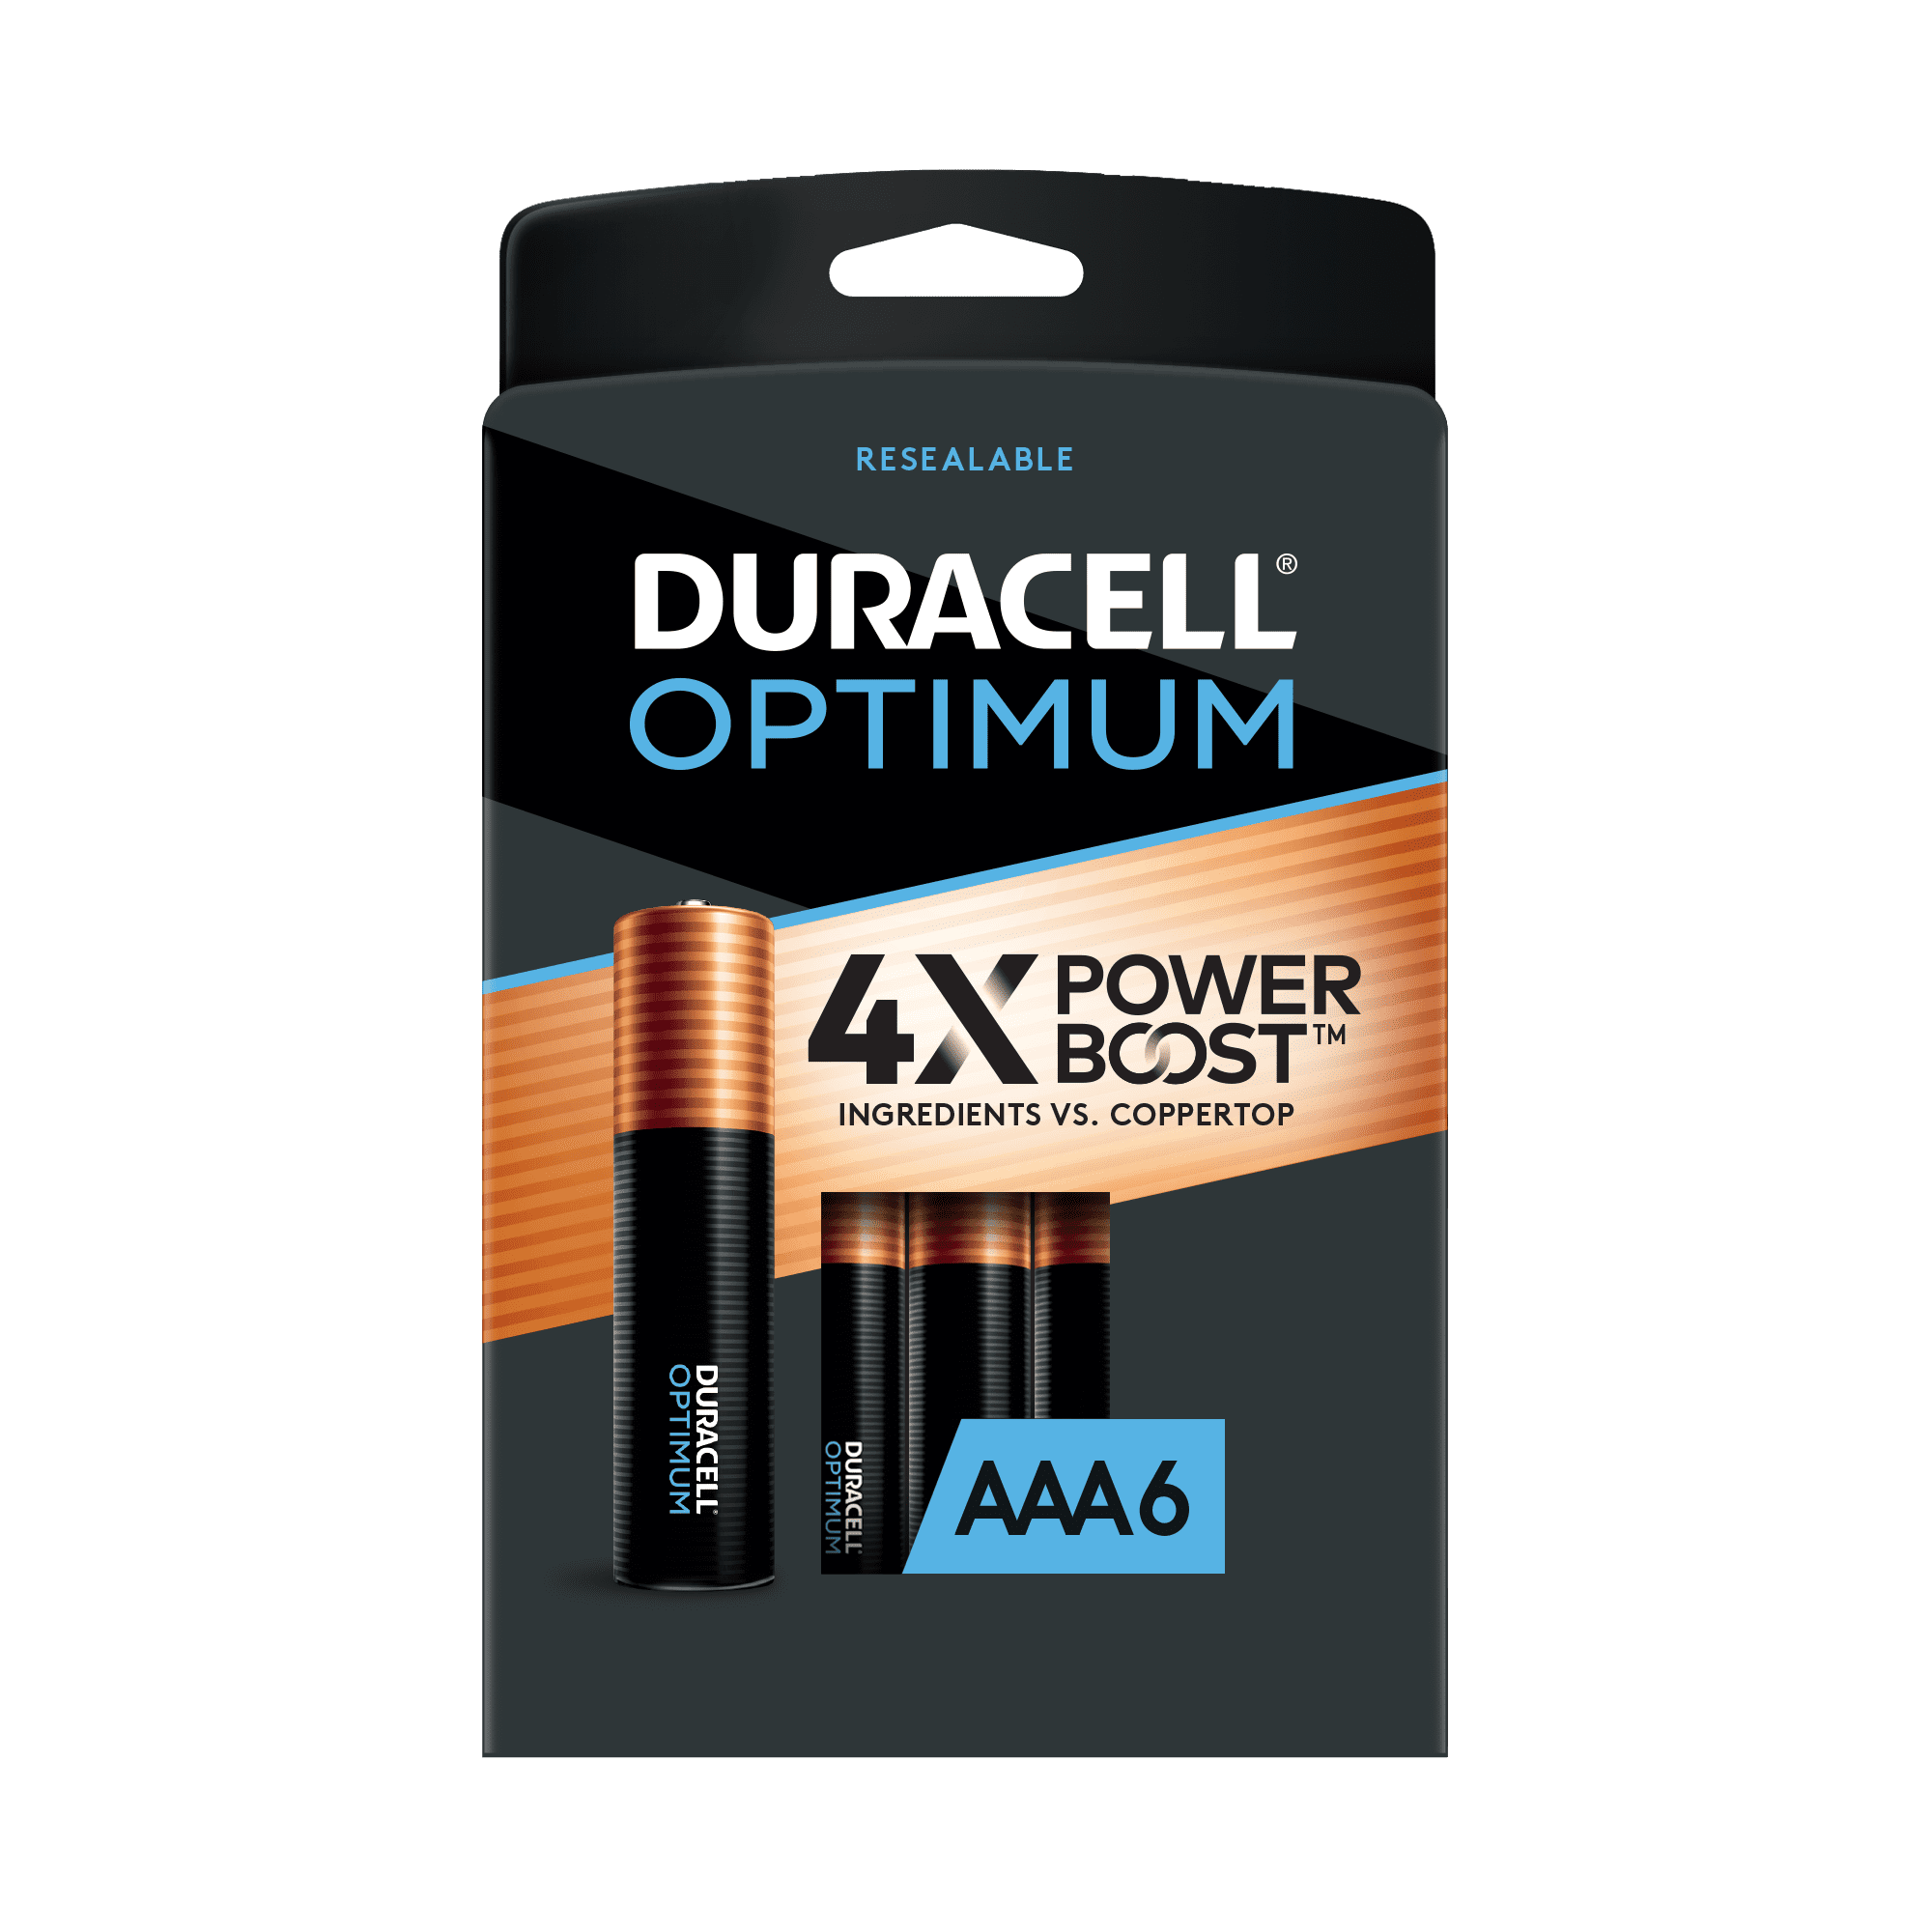 Duracell Optimum AAA Battery with 4X POWER BOOST™, 6 Pack Resealable Package